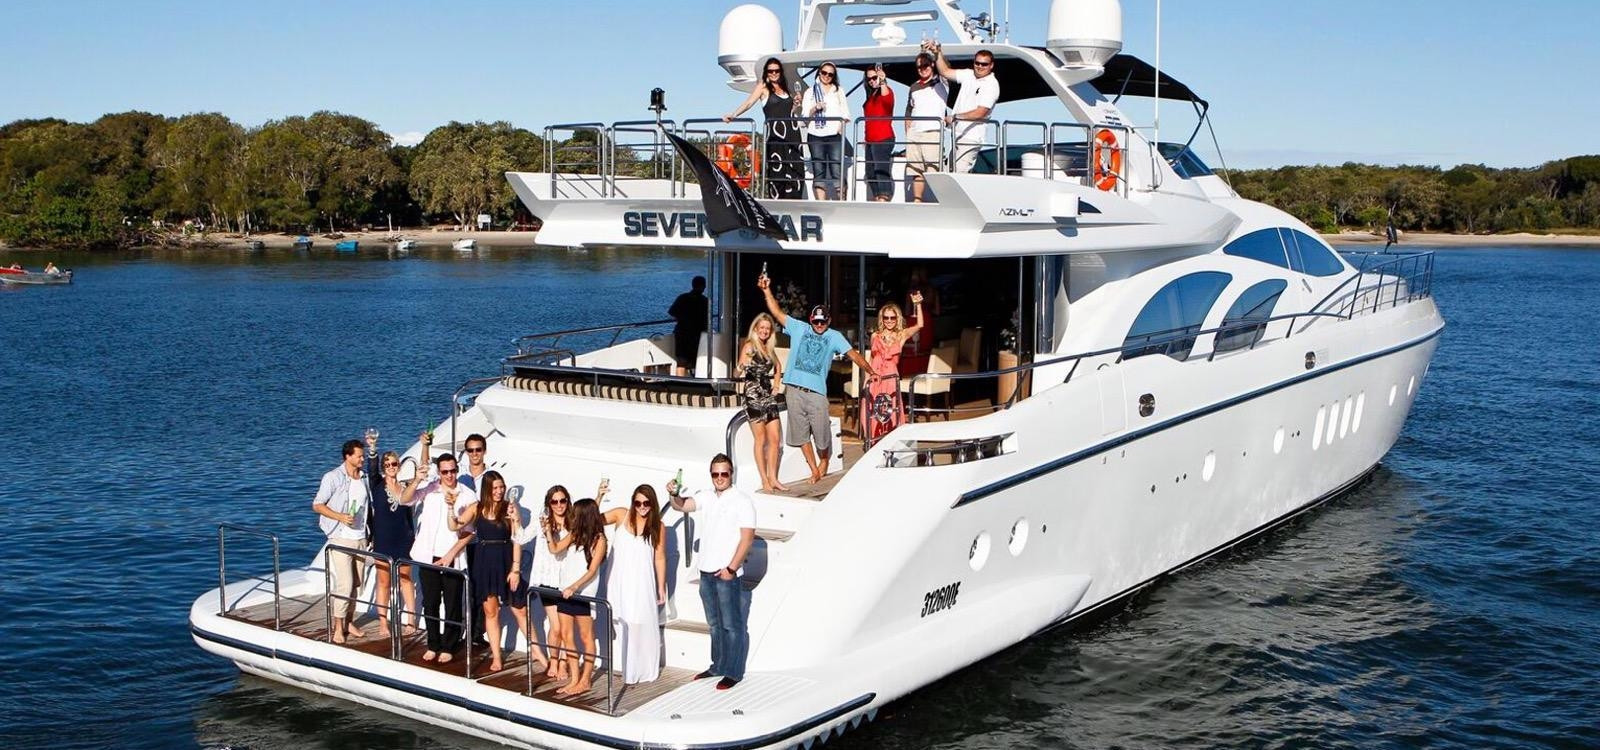 new years eve cruise on Seven Star ideal for functions